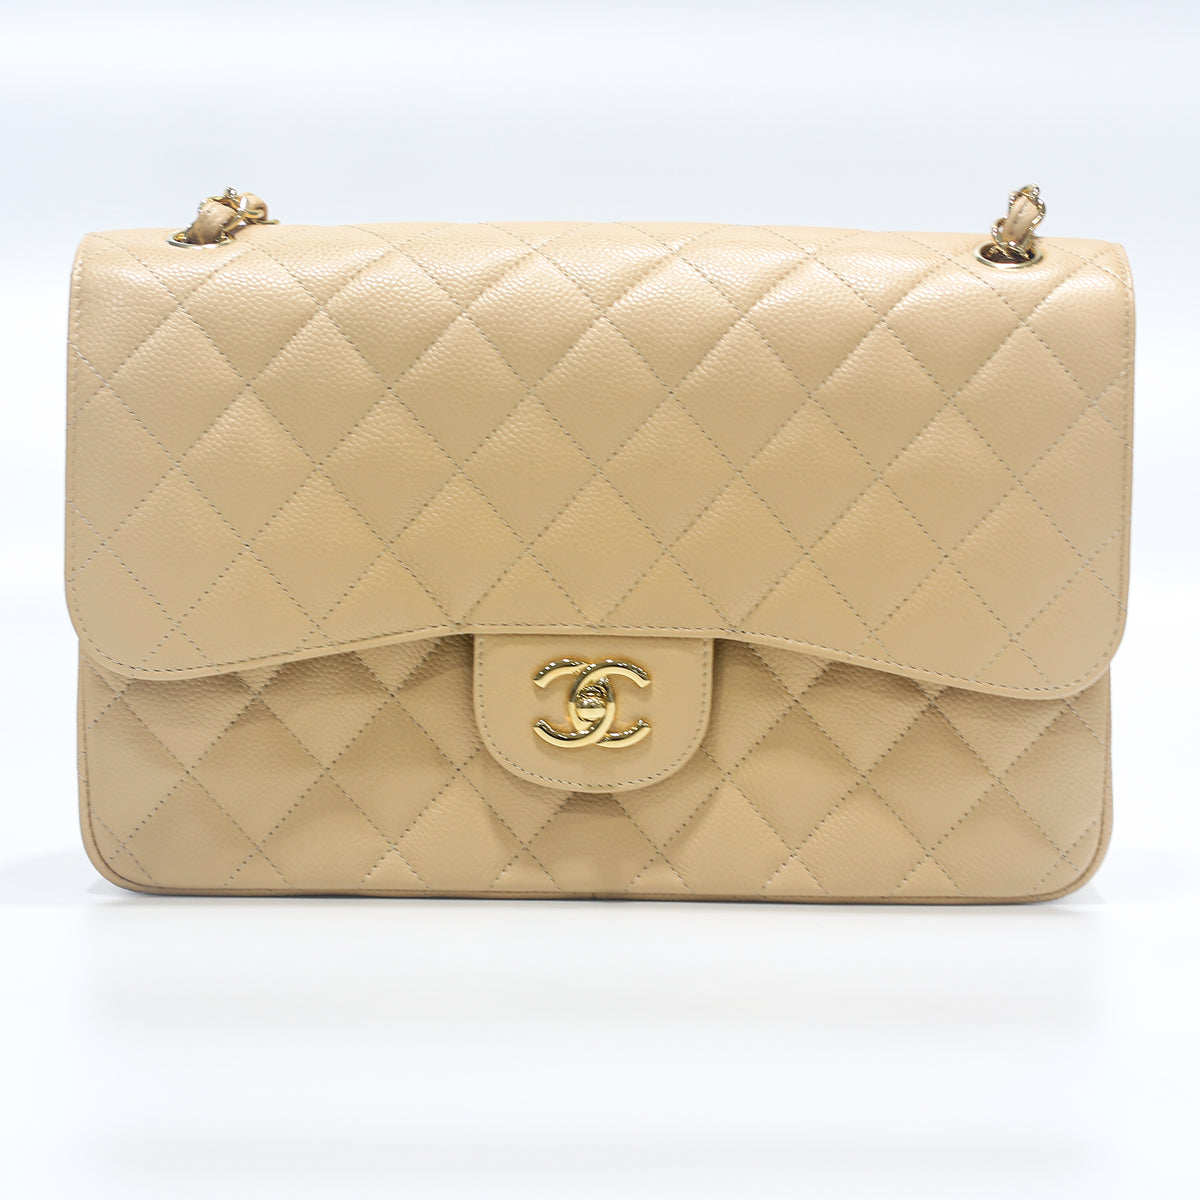 Timeless/classique leather handbag Chanel Yellow in Leather - 38040402